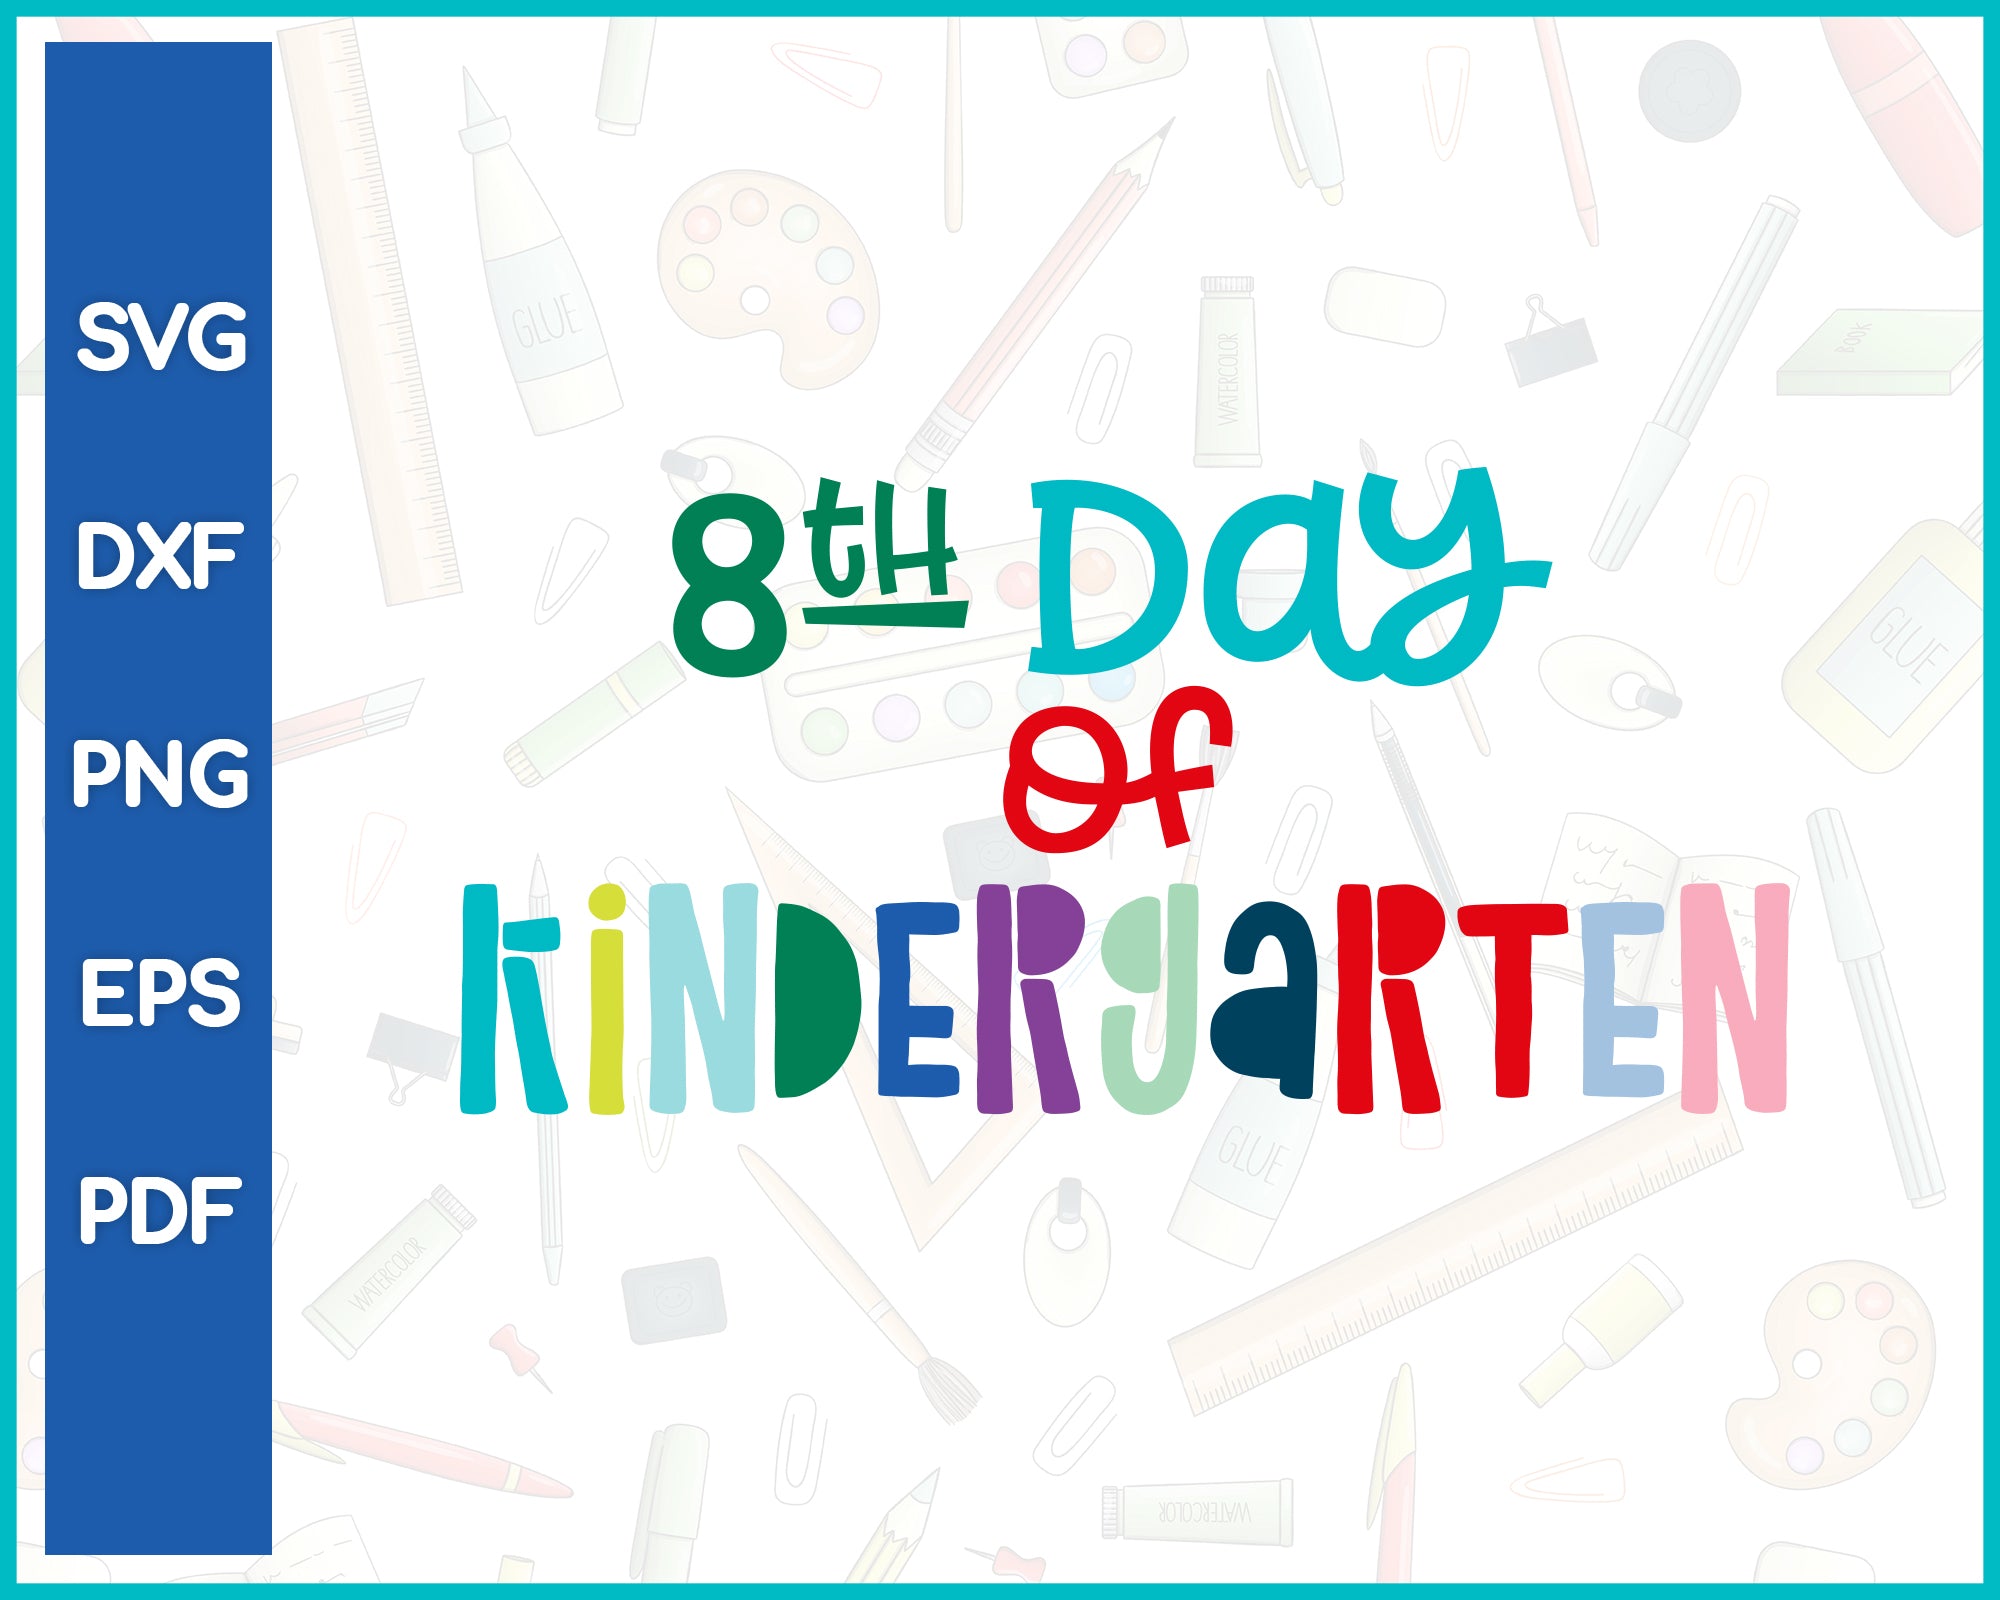 8th Day of Kindergarten Teacher Cut File For Cricut svg, dxf, png, eps, pdf Silhouette Printable Files